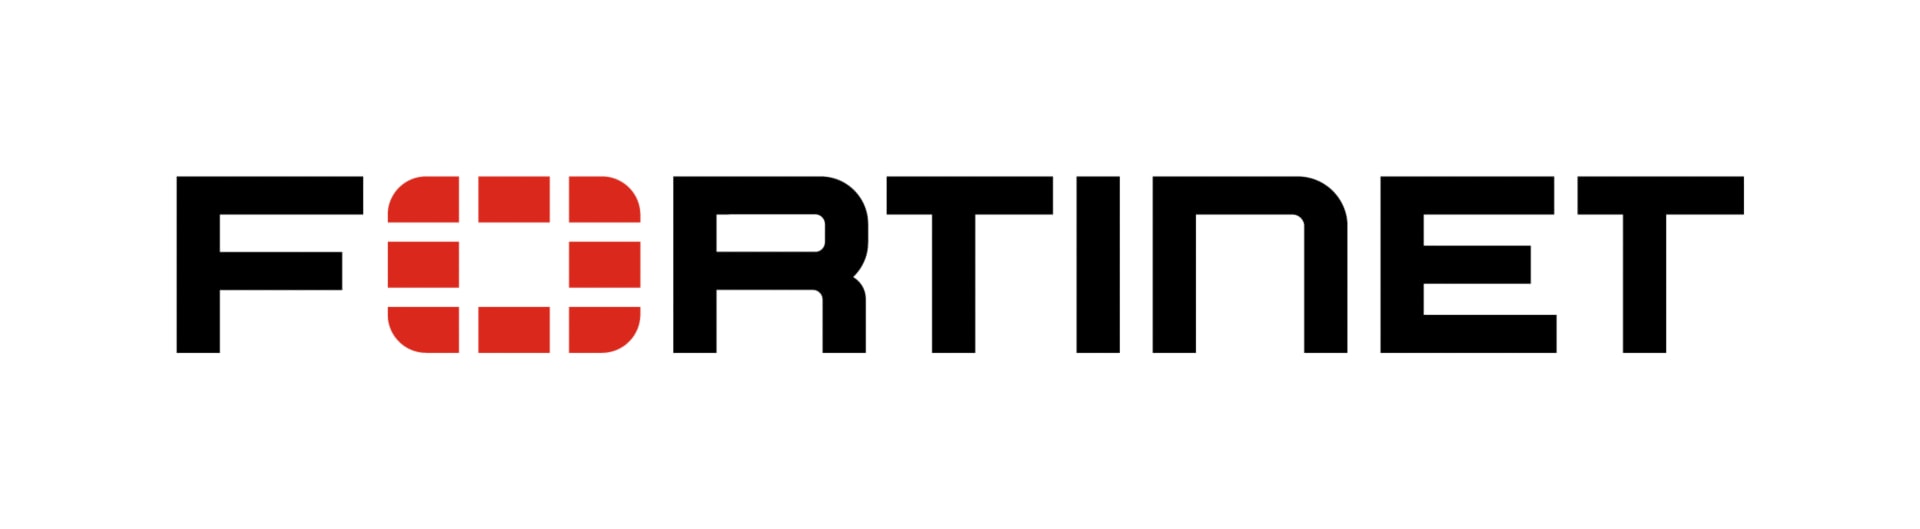 Fortinet FortiCare 24X7 Comprehensive Support - technical support (renewal)